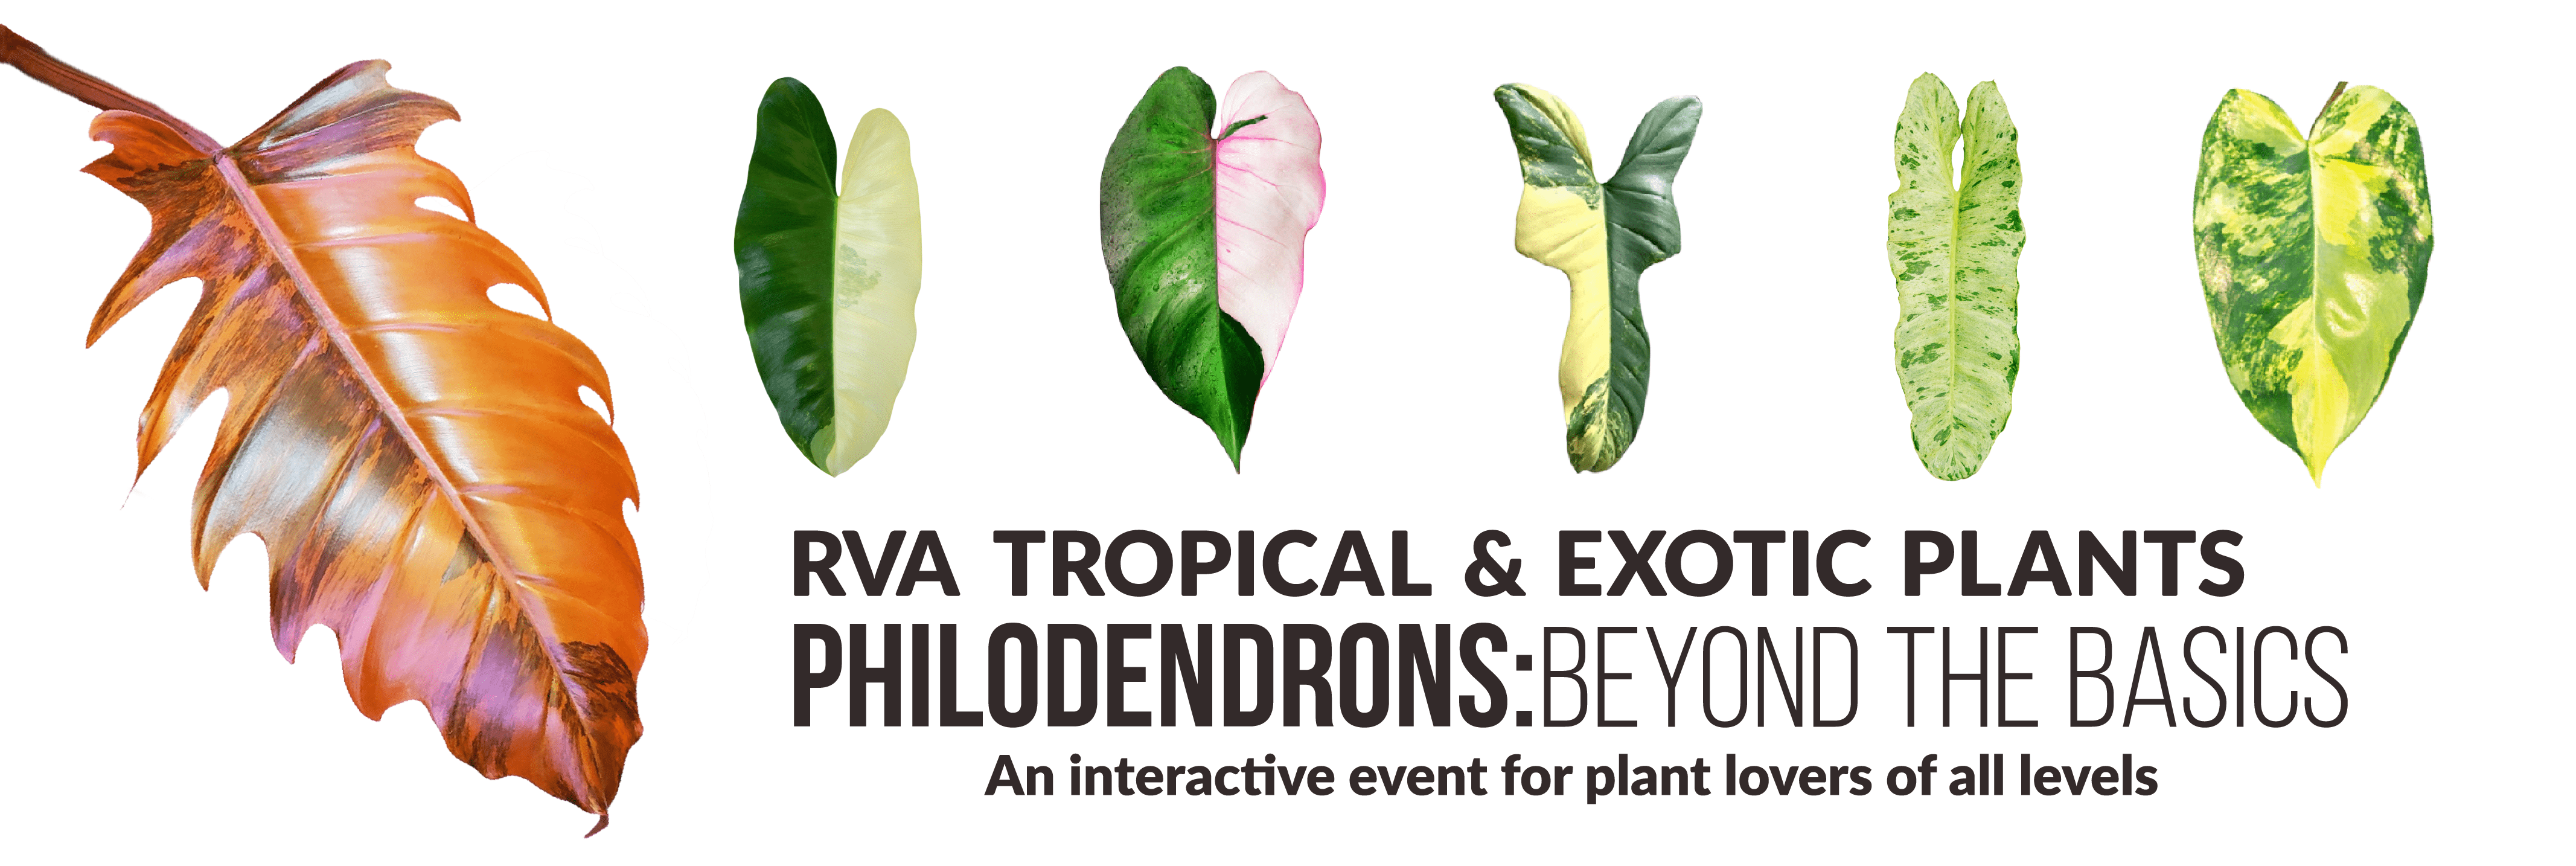 Philodendrons: Beyond the Basics